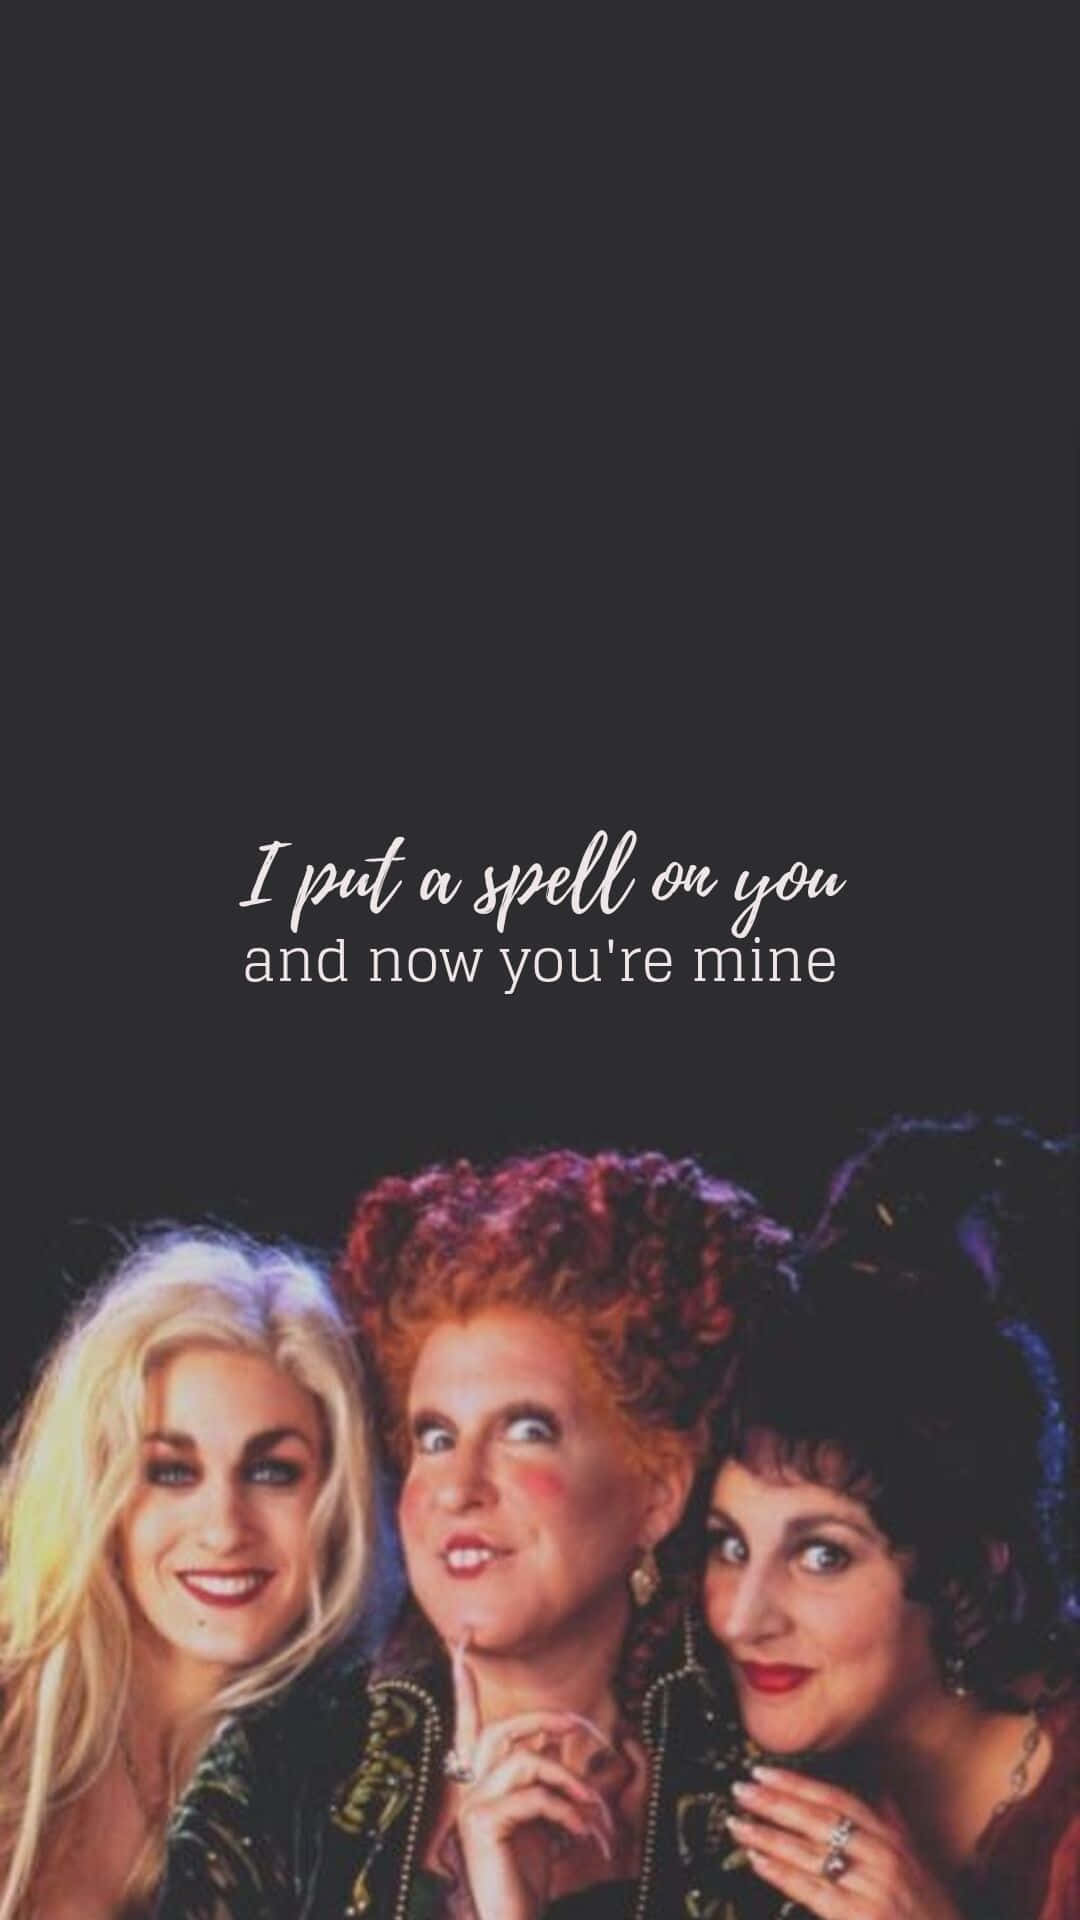 Enjoy the magical world of Hocus Pocus with this gorgeous iPhone Wallpaper